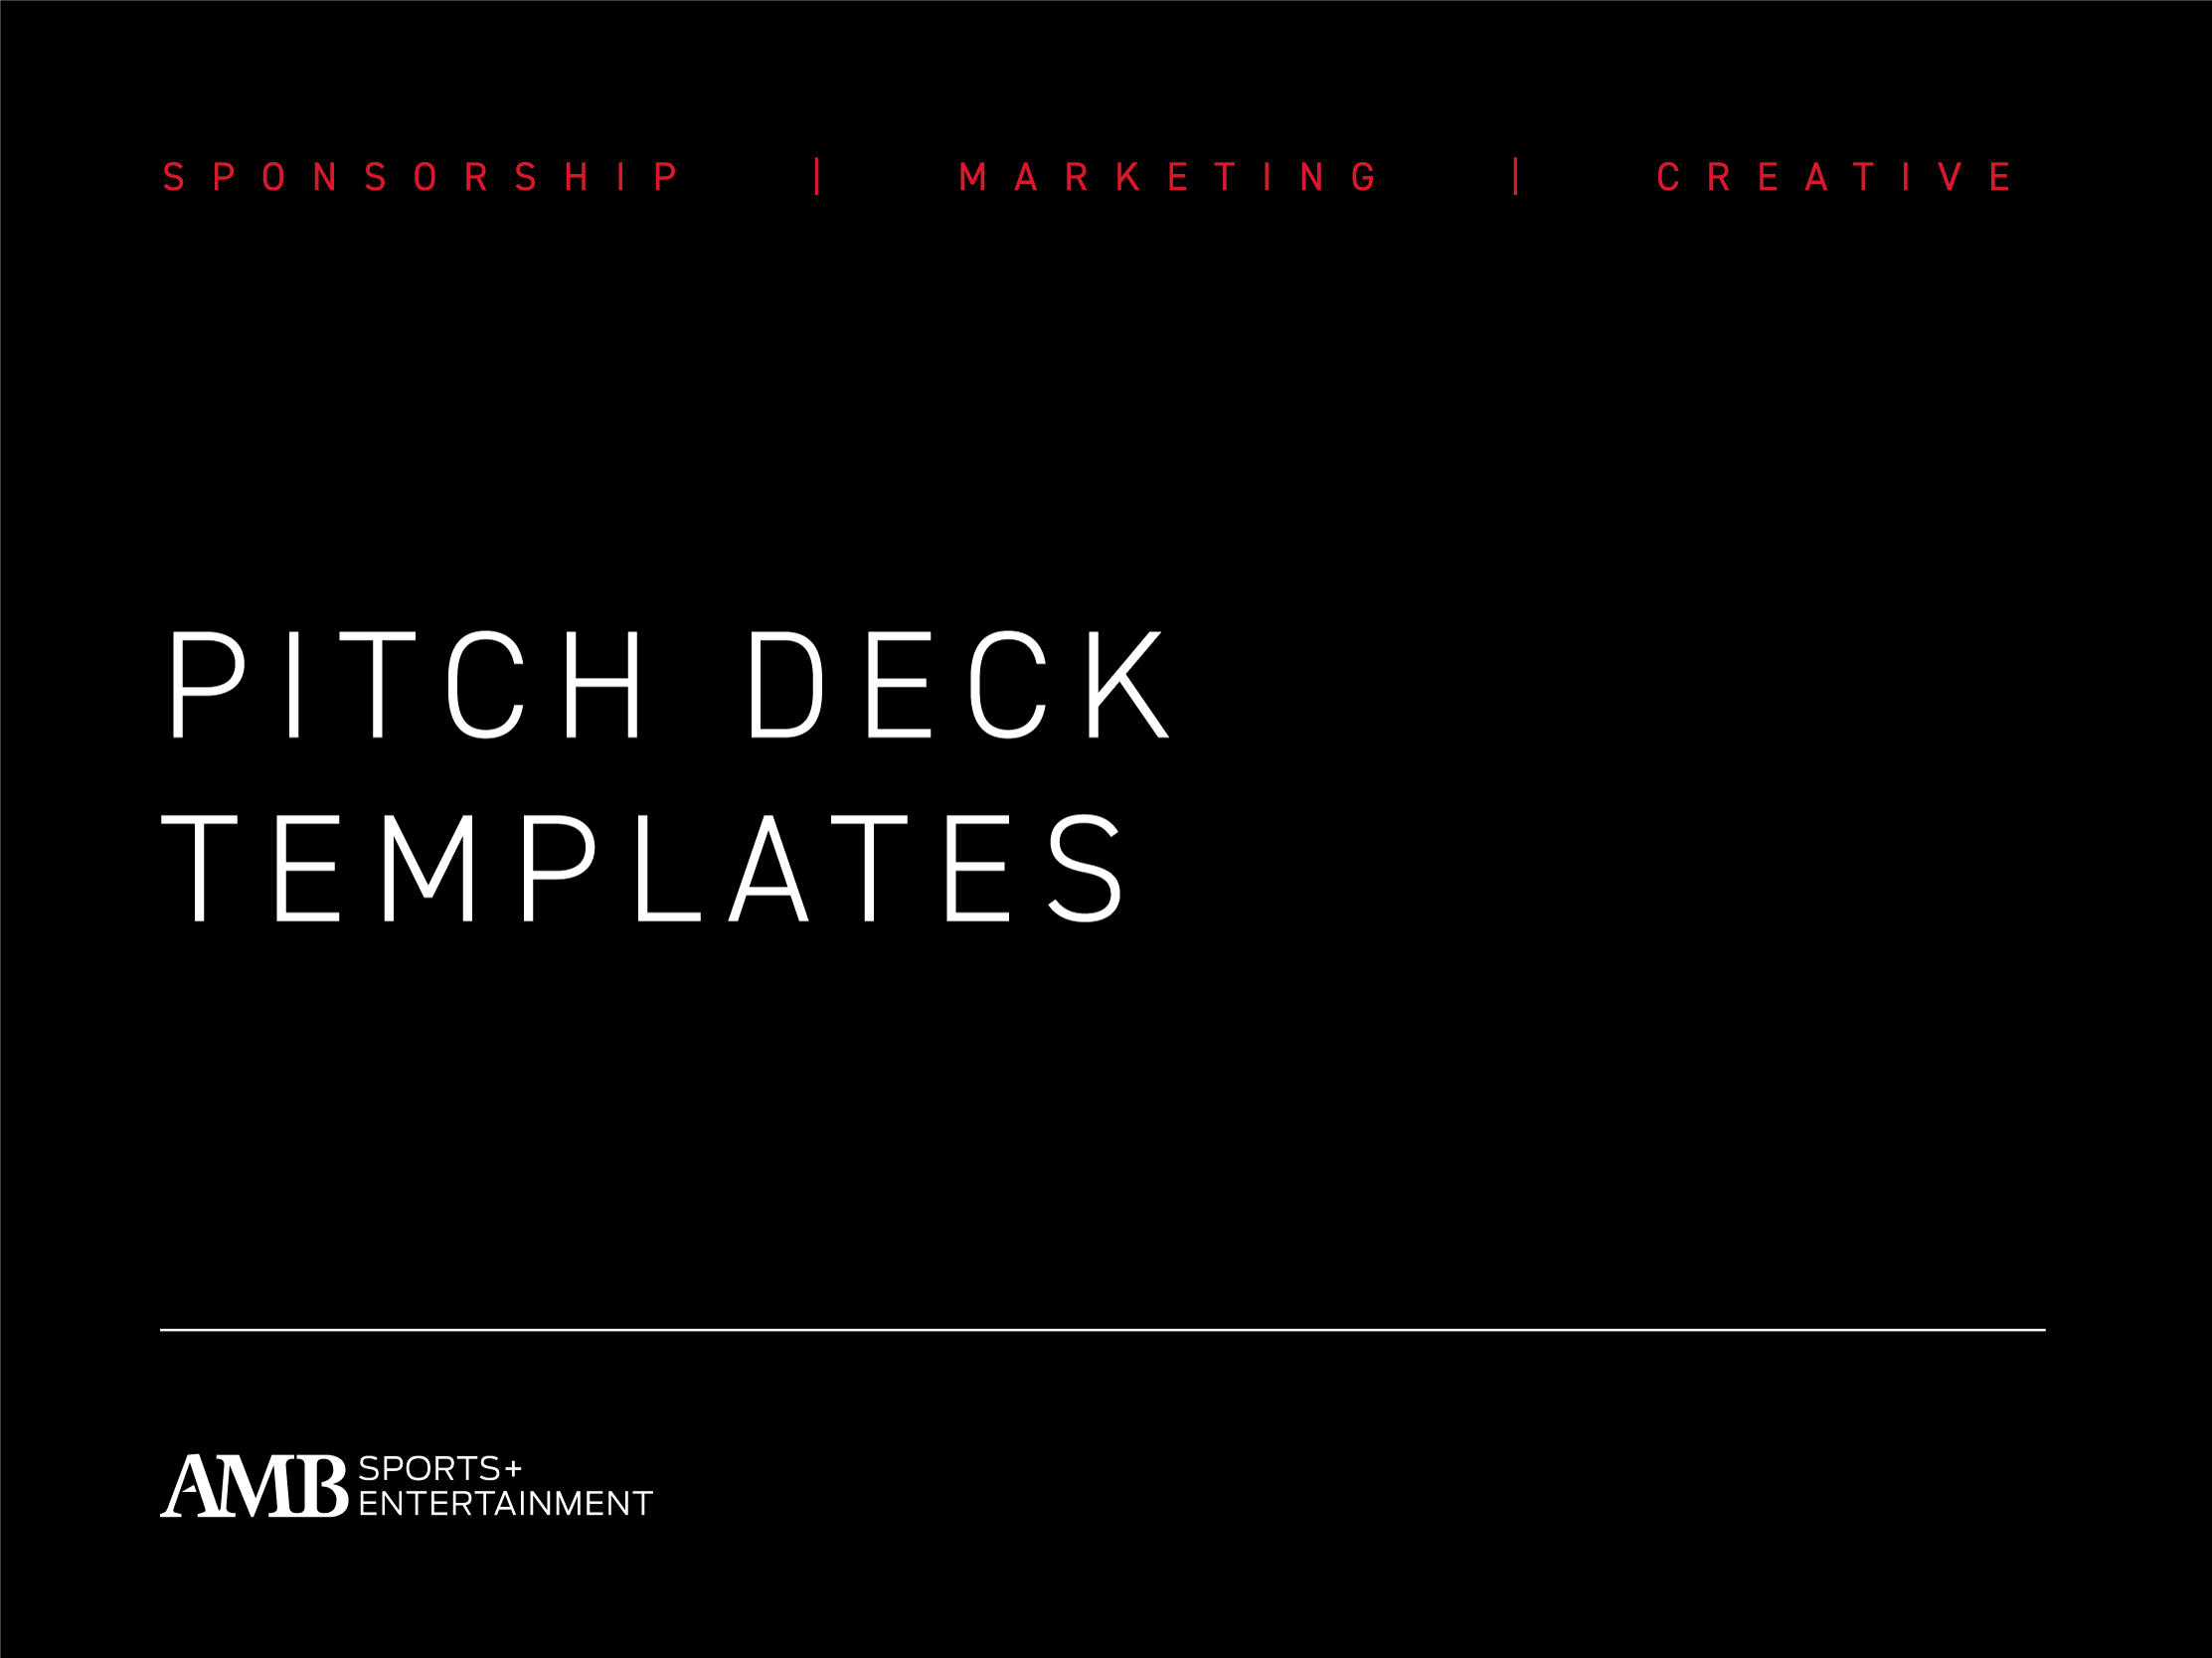 Winning Deck Templates for AMB Sports + Entertainment